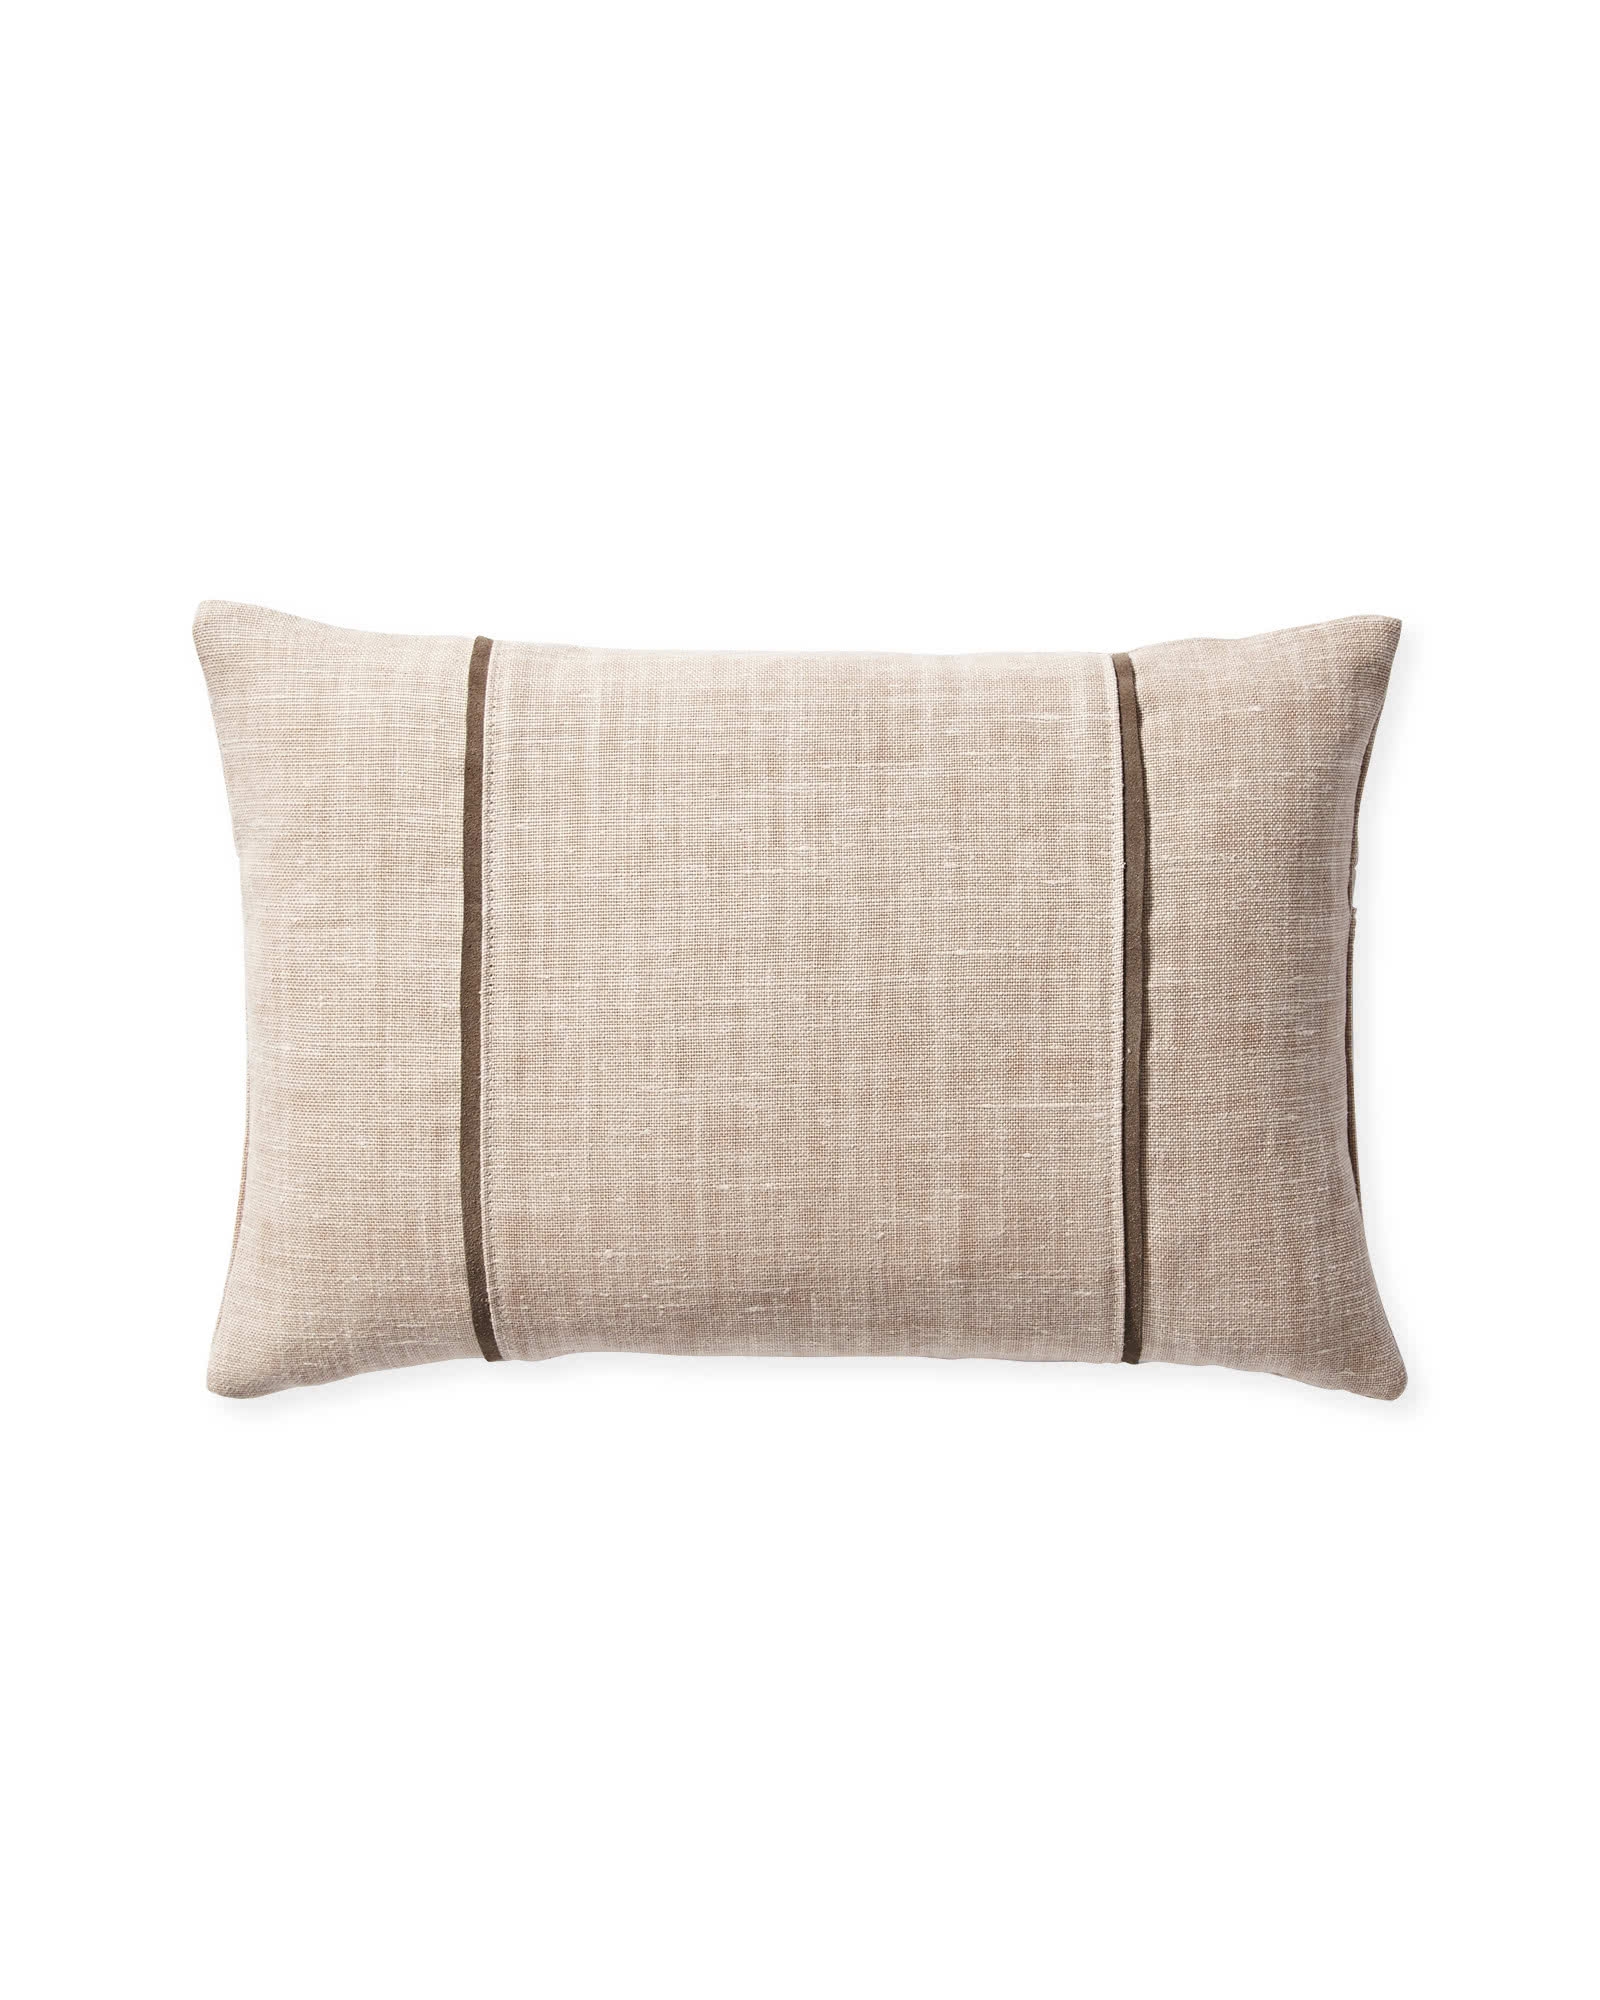 Kentfield 12" x 18" Pillow Cover - Pink Sand - Insert sold separately - Image 0